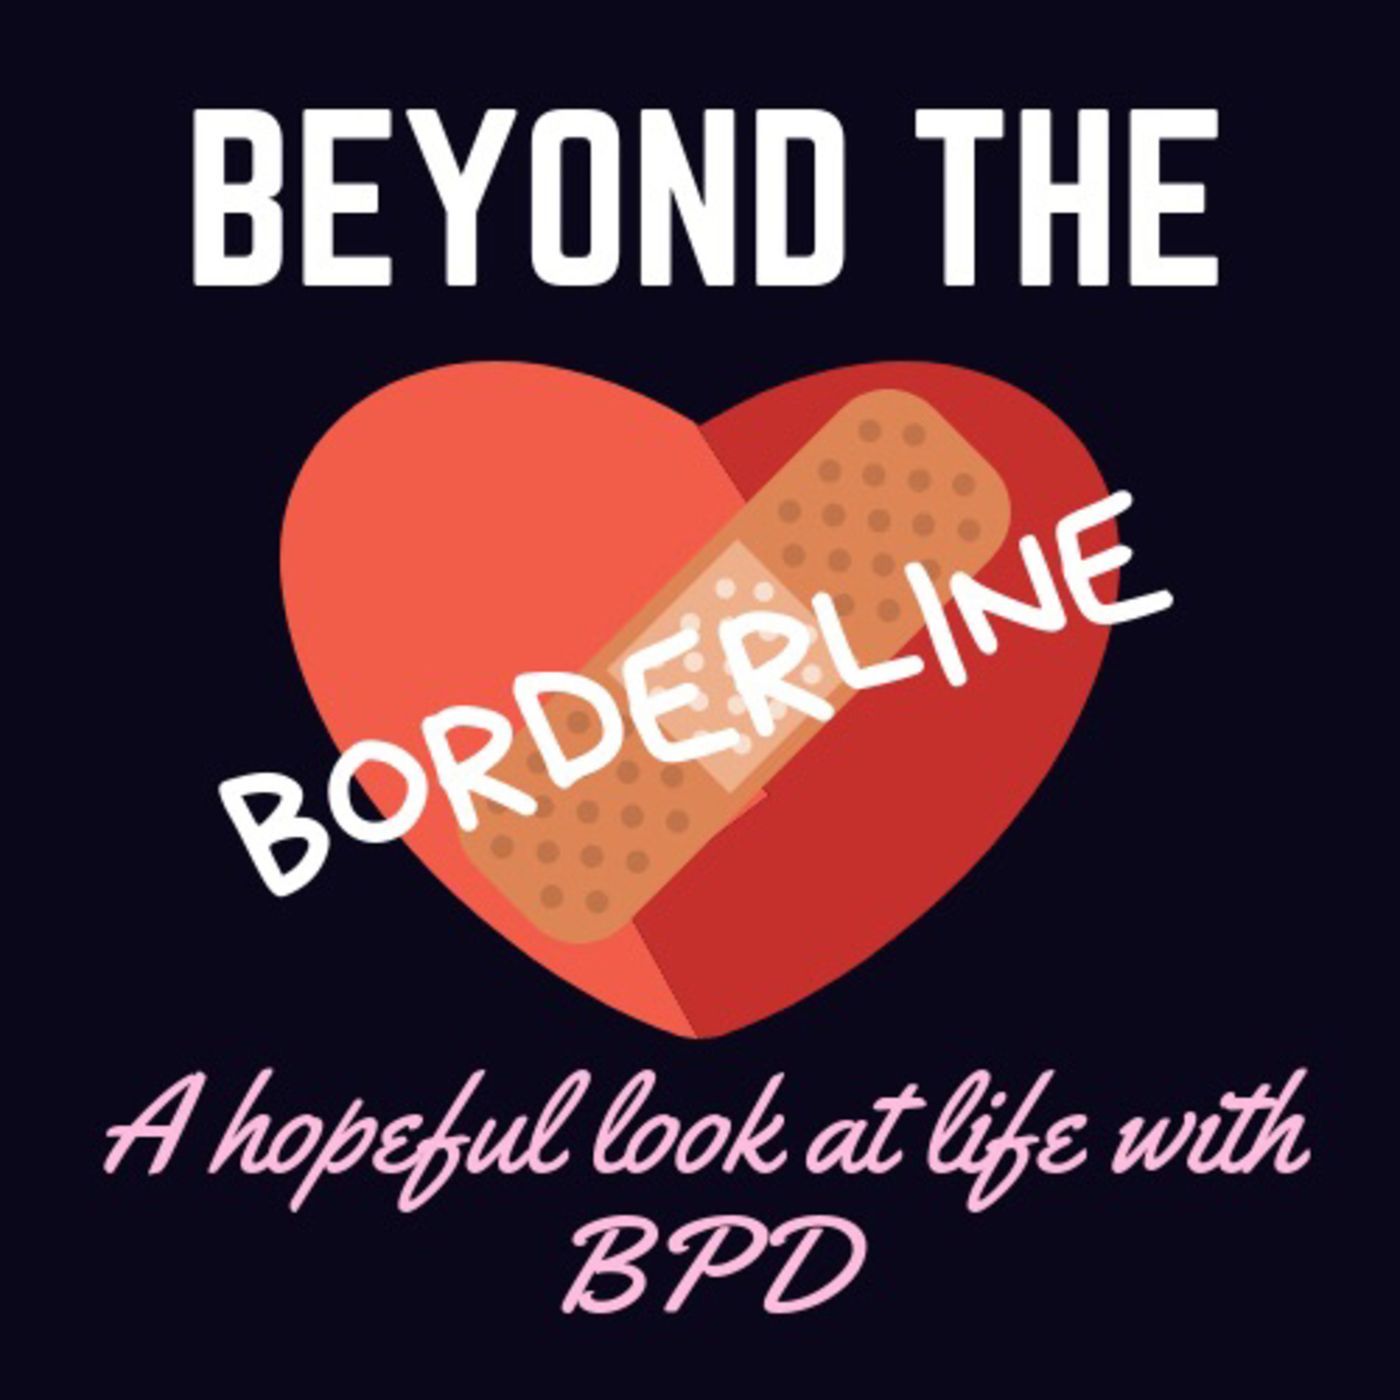 Beyond the Borderline - Using the IMPROVE tool - from DBT - to navigate stressful situations without making them worse.